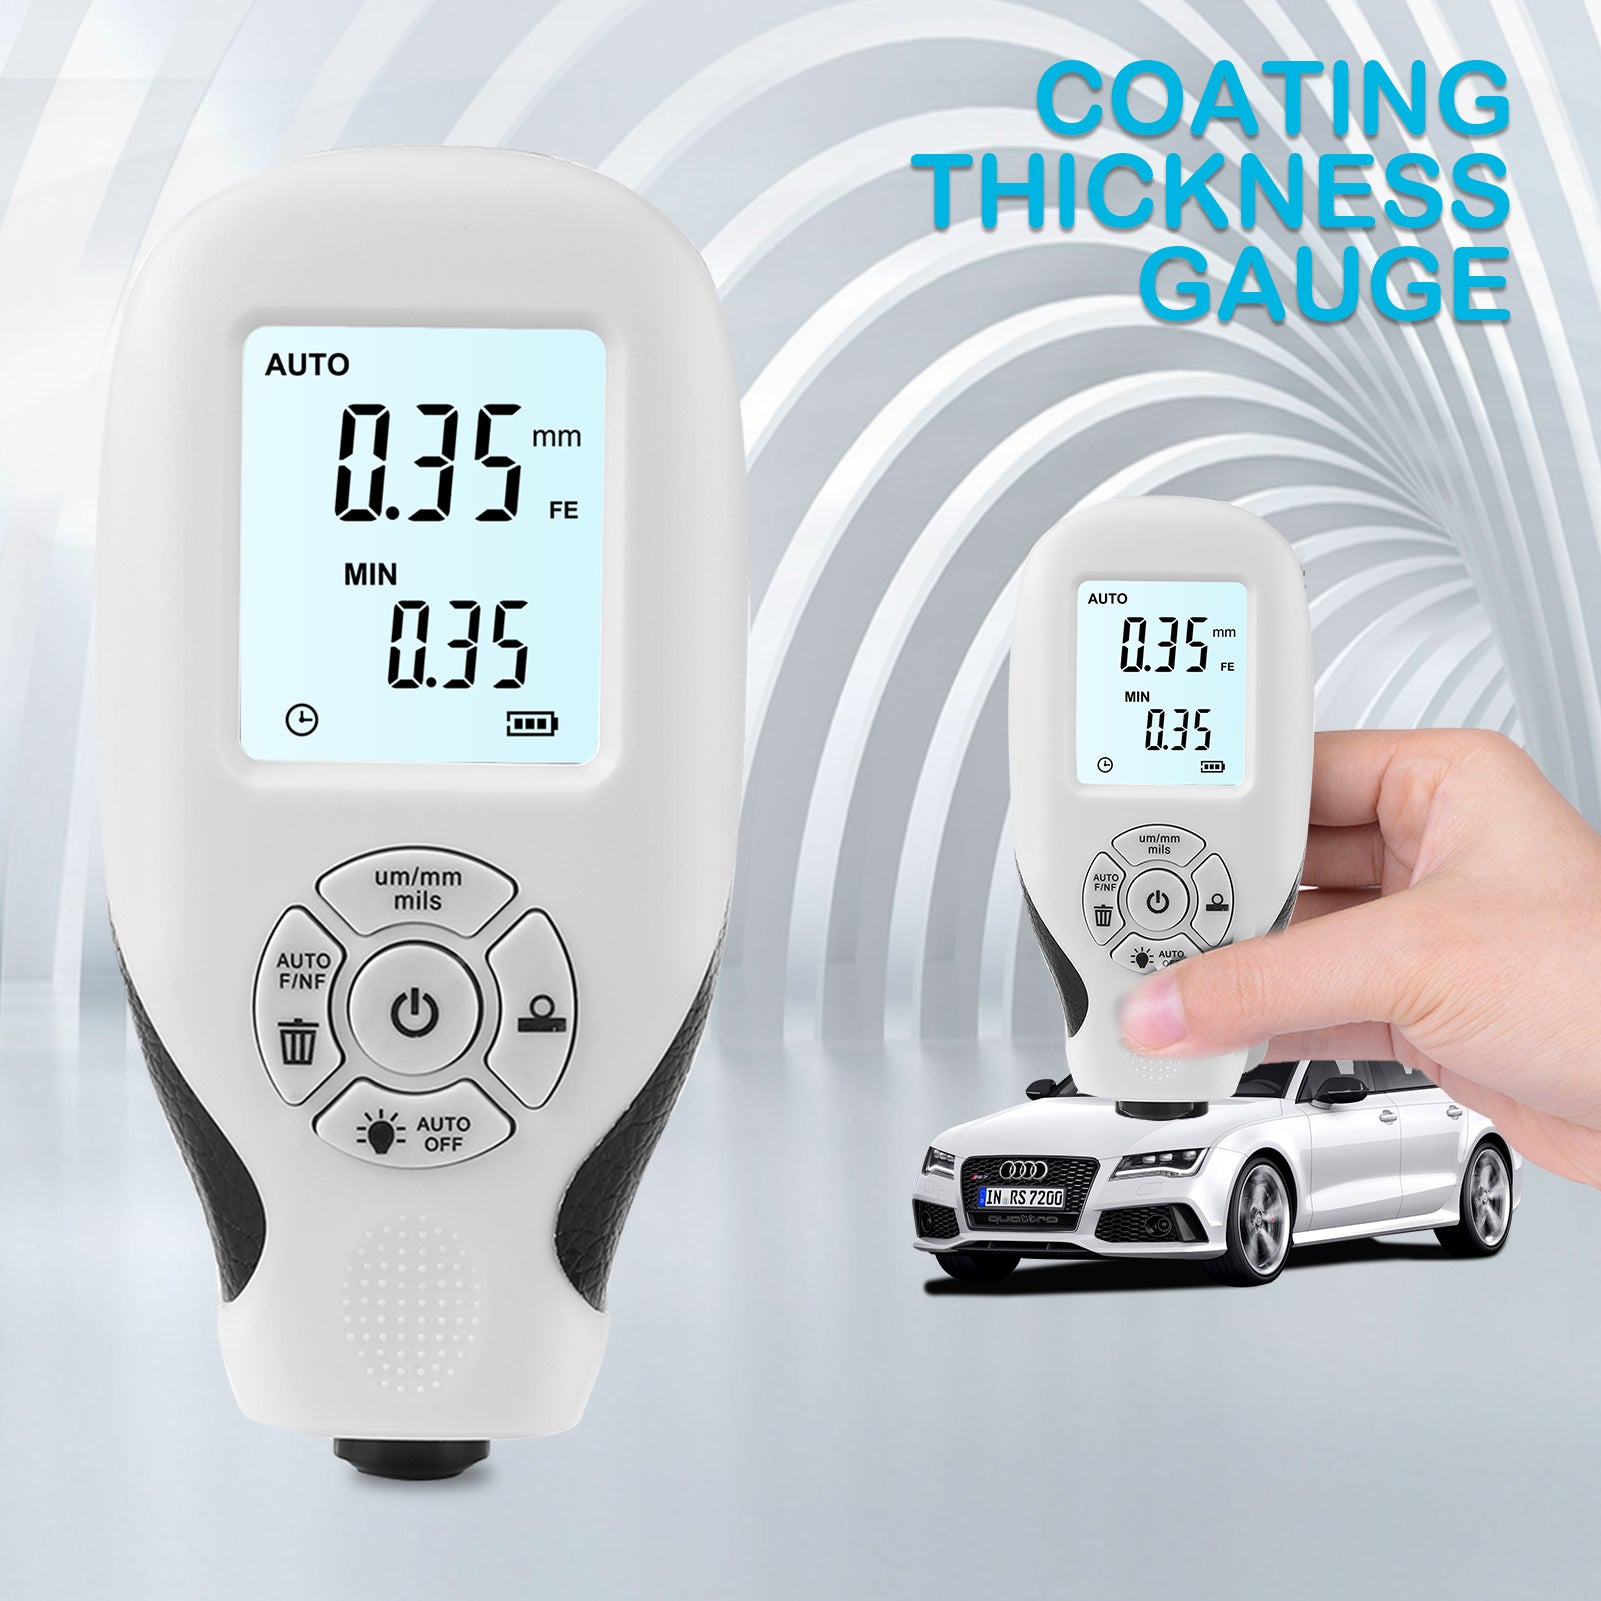 Car Coating Thickness Gauge, Digital LCD Display, Automotive Paint Tester